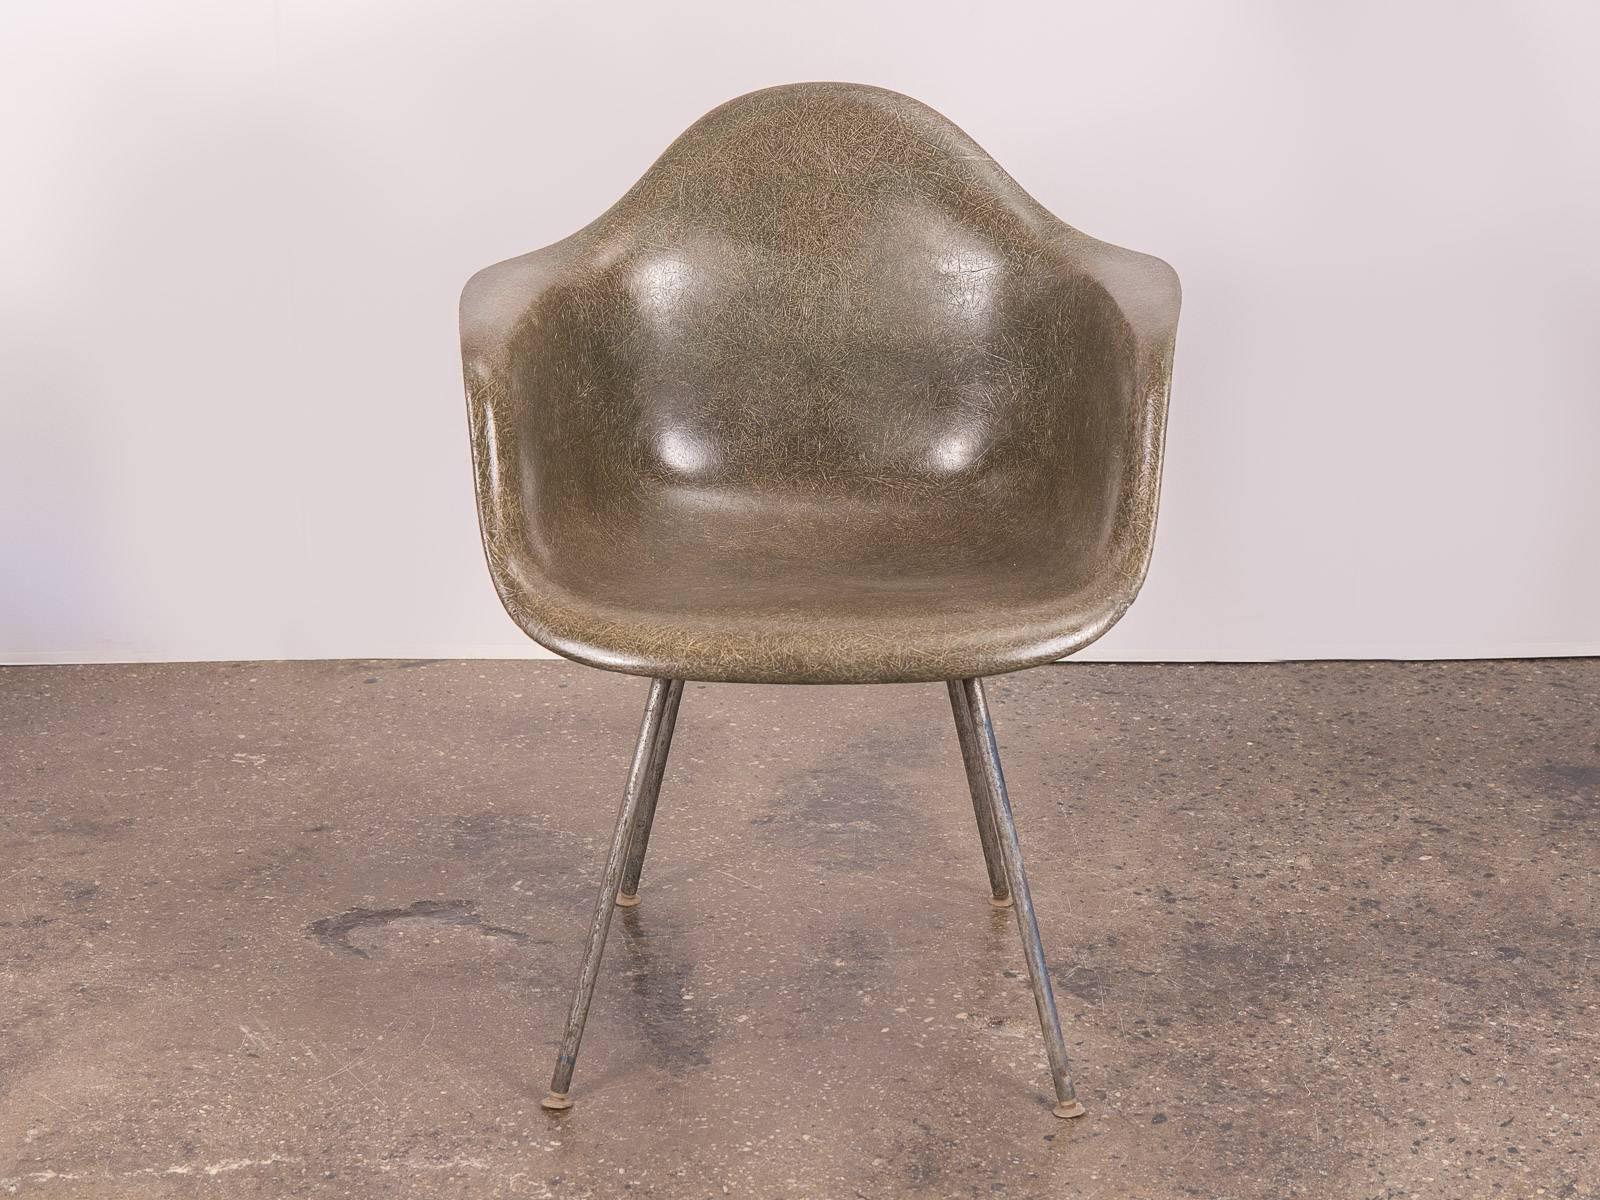 Vintage Eames molded fiberglass armchair in the scarce, olive green hue on a the nickel H-base for Herman Miller. Original finish with distinct thread texture that varies in saturation and density throughout the chair. Excellent vintage condition